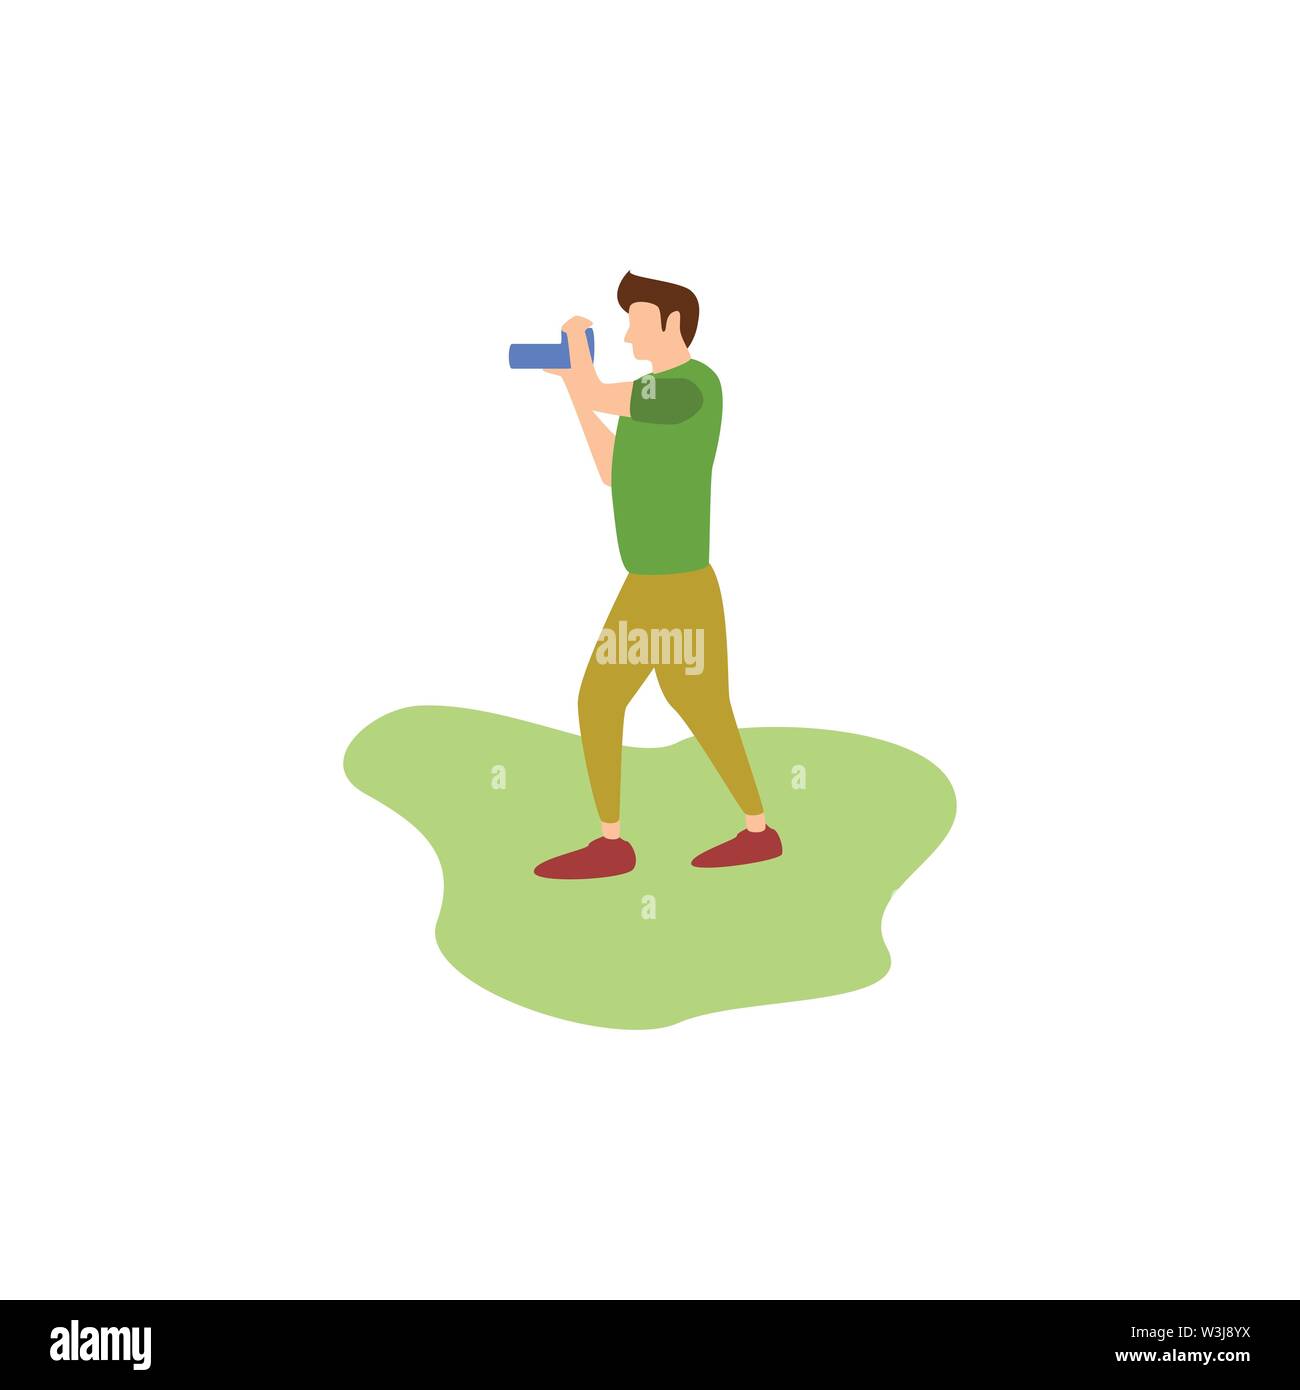 A man taking a photos in the park, Human Hobbies Photography Stock Vector